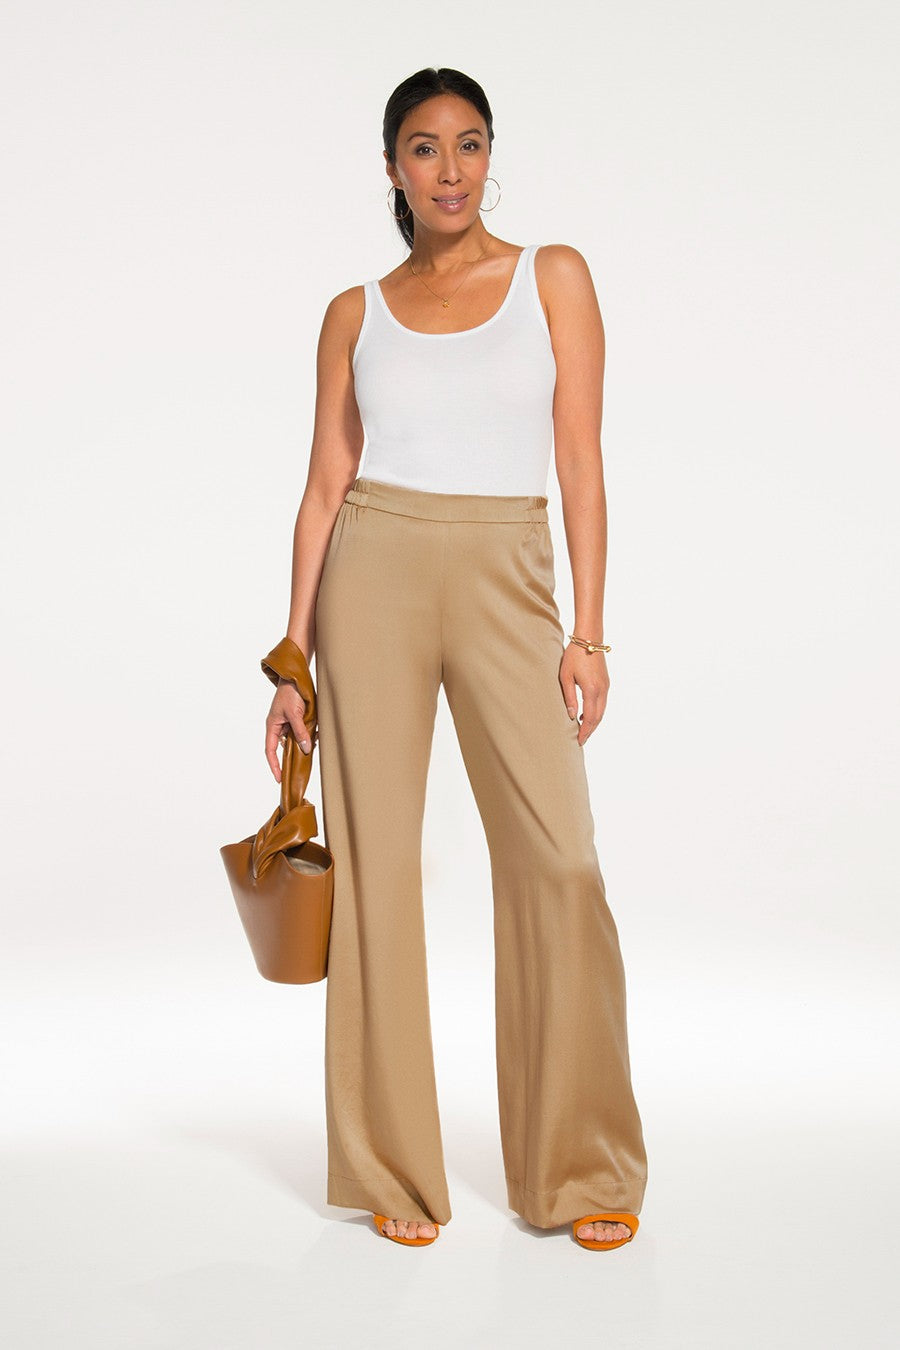 Beige Silk Pants for Women, Made in Canada, Espino Silk